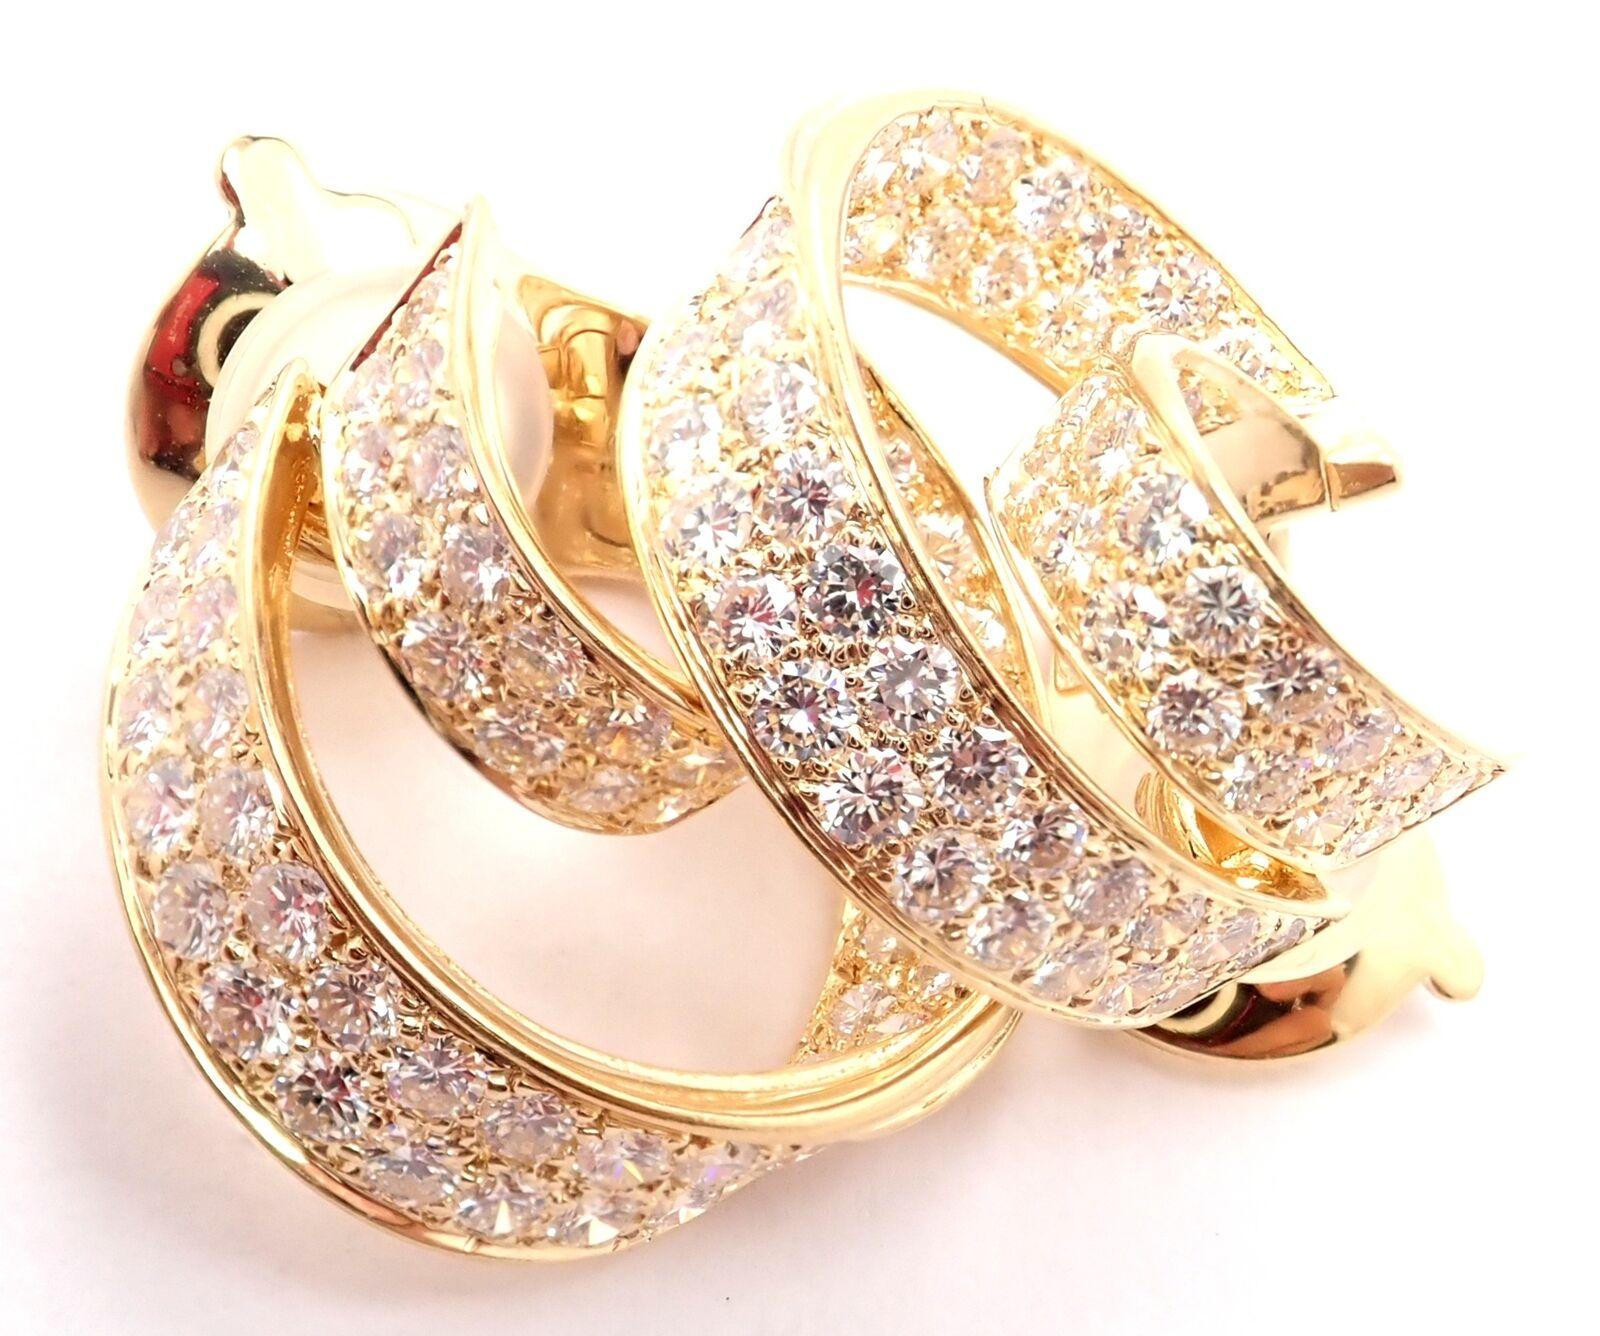 18k Yellow Gold Diamond Double Hoop Earrings by Van Cleef & Arpels. 
With 84 round brilliant cut diamond VVS1 clarity, E color total weight 3.84ct
These earrings are for non pierced ears, but they can be converted to pierced by adding